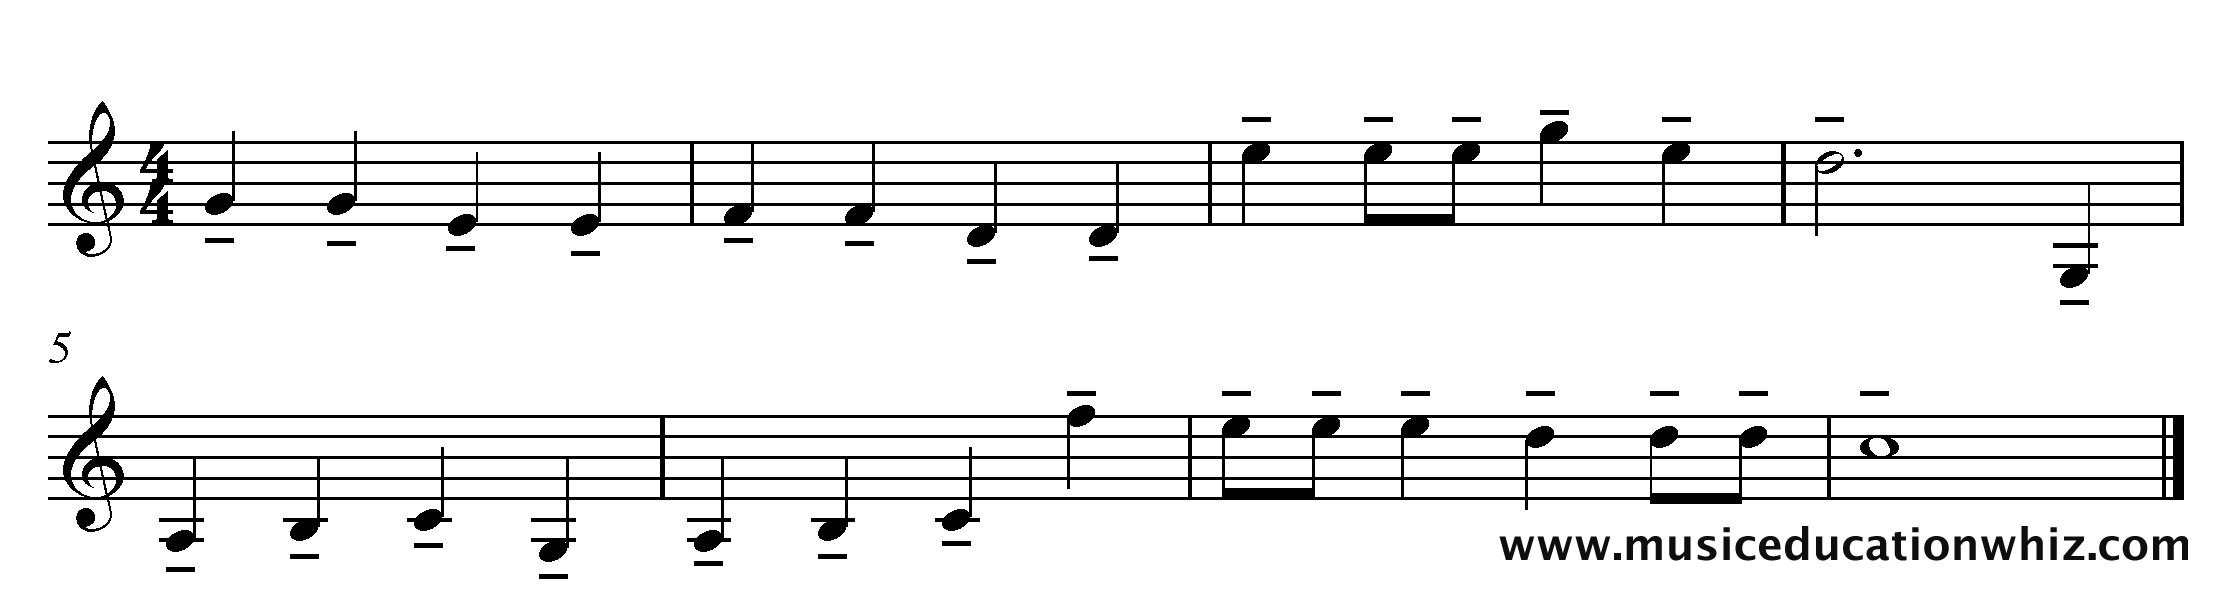 The music for 'Mary Mary Quite Contrary' with tenuto markings.